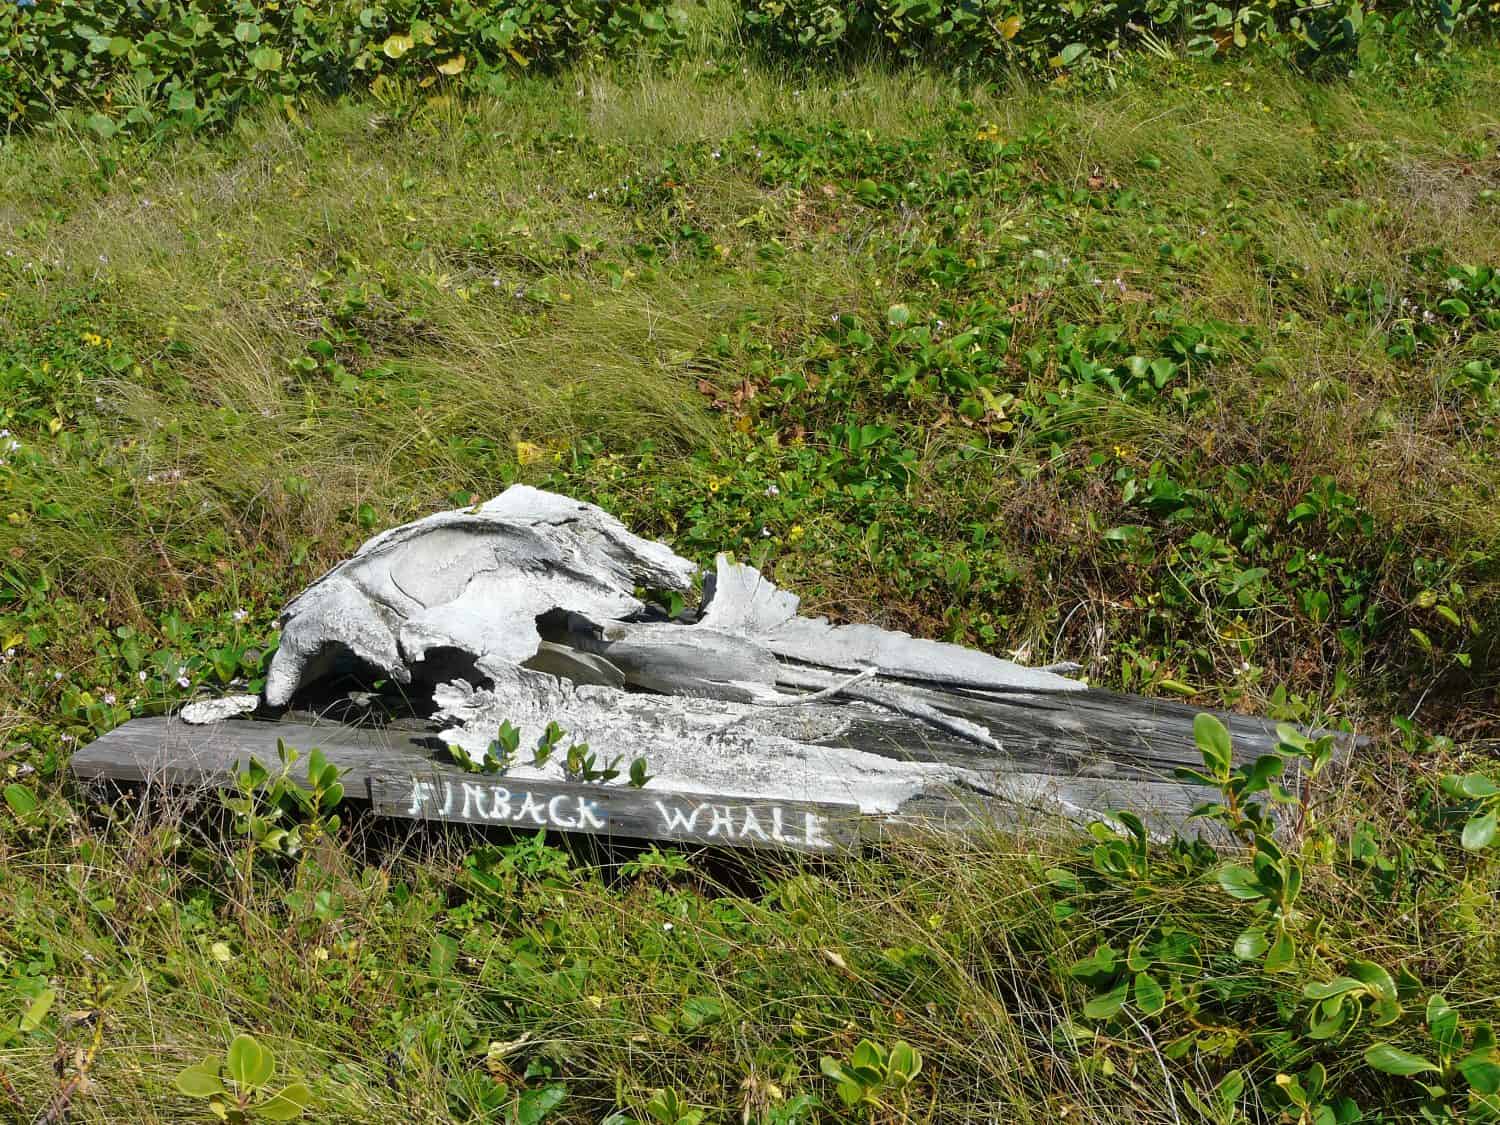 A finback whale skull at Archie Carr National Wildlife Refuge Barrier Island Sanctuary Management and Education Center, Melbourne Beach, Florida.